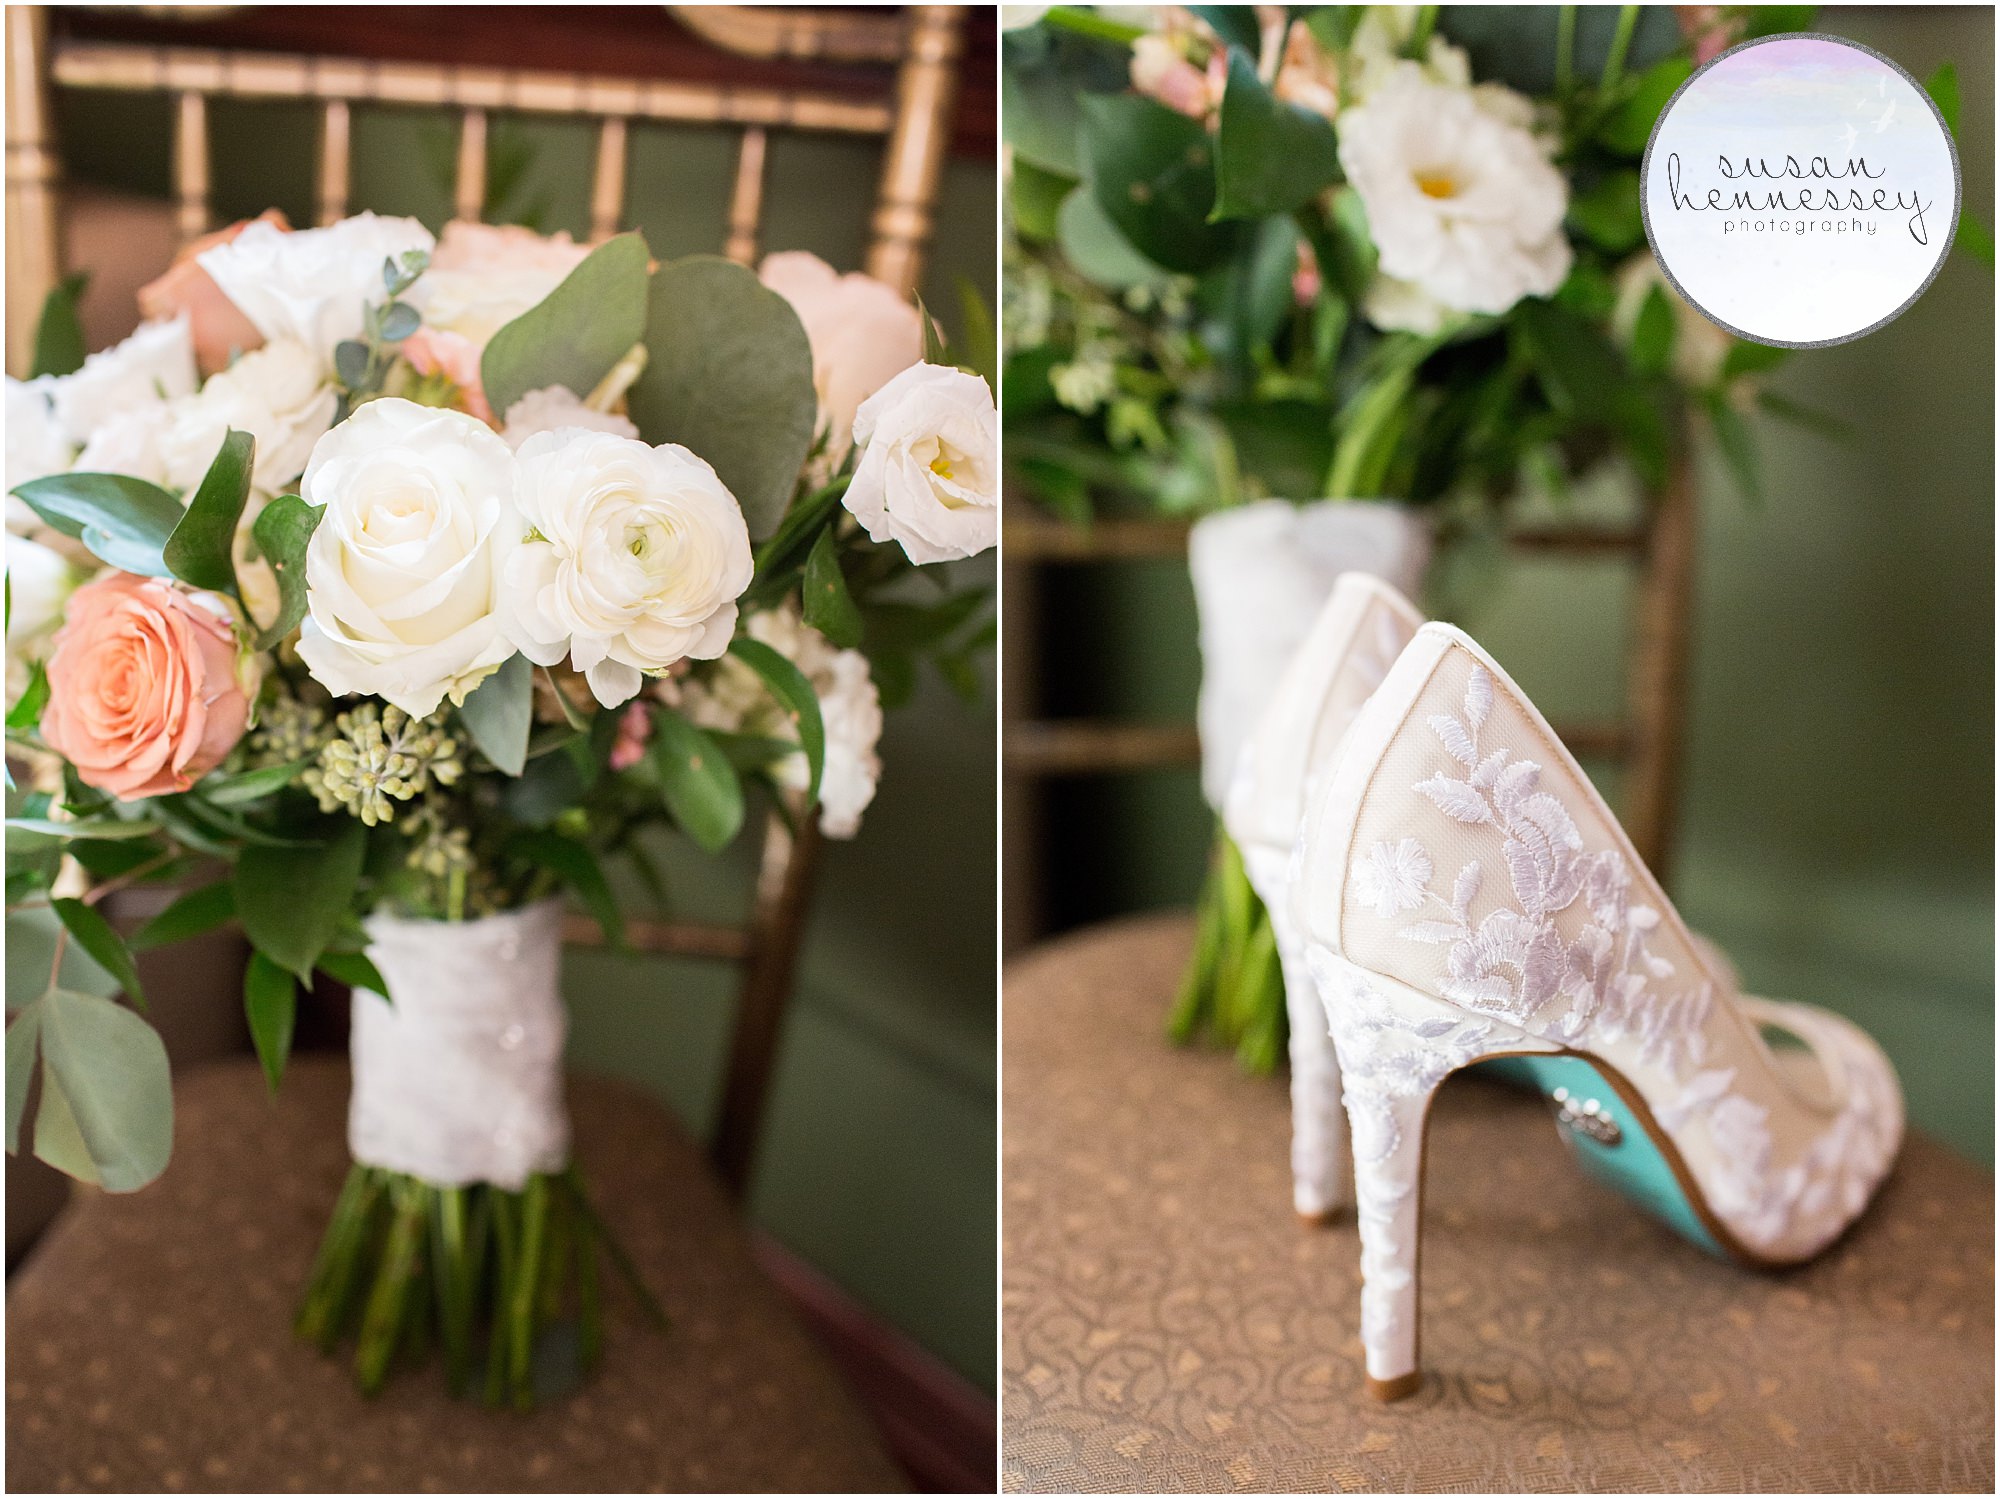 Bride's summer bouquet and Betsey Johnson wedding shoes.